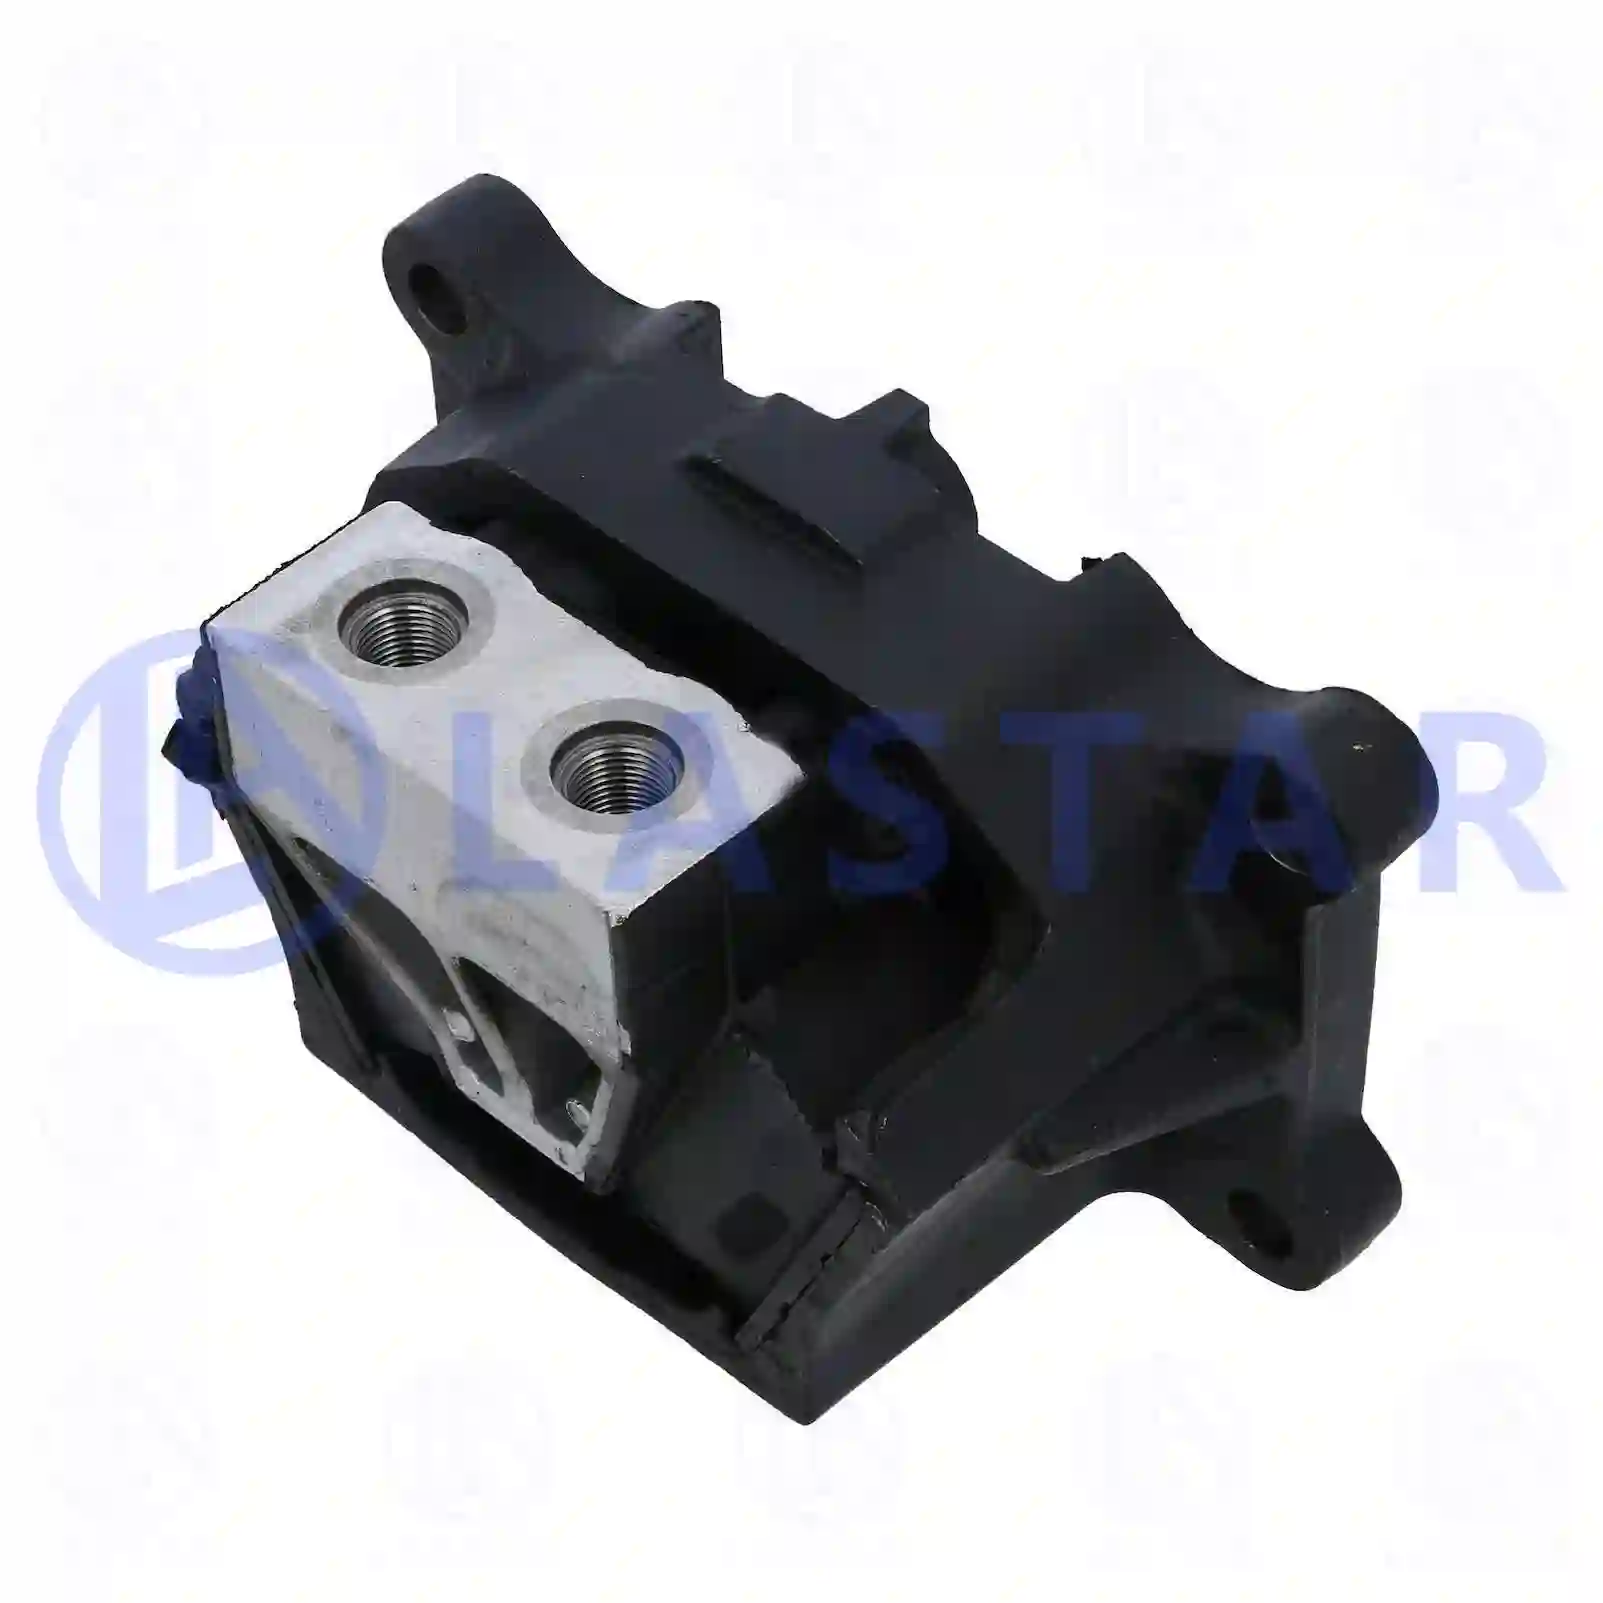 Engine mounting, 77702417, 9412418213, , , , ||  77702417 Lastar Spare Part | Truck Spare Parts, Auotomotive Spare Parts Engine mounting, 77702417, 9412418213, , , , ||  77702417 Lastar Spare Part | Truck Spare Parts, Auotomotive Spare Parts